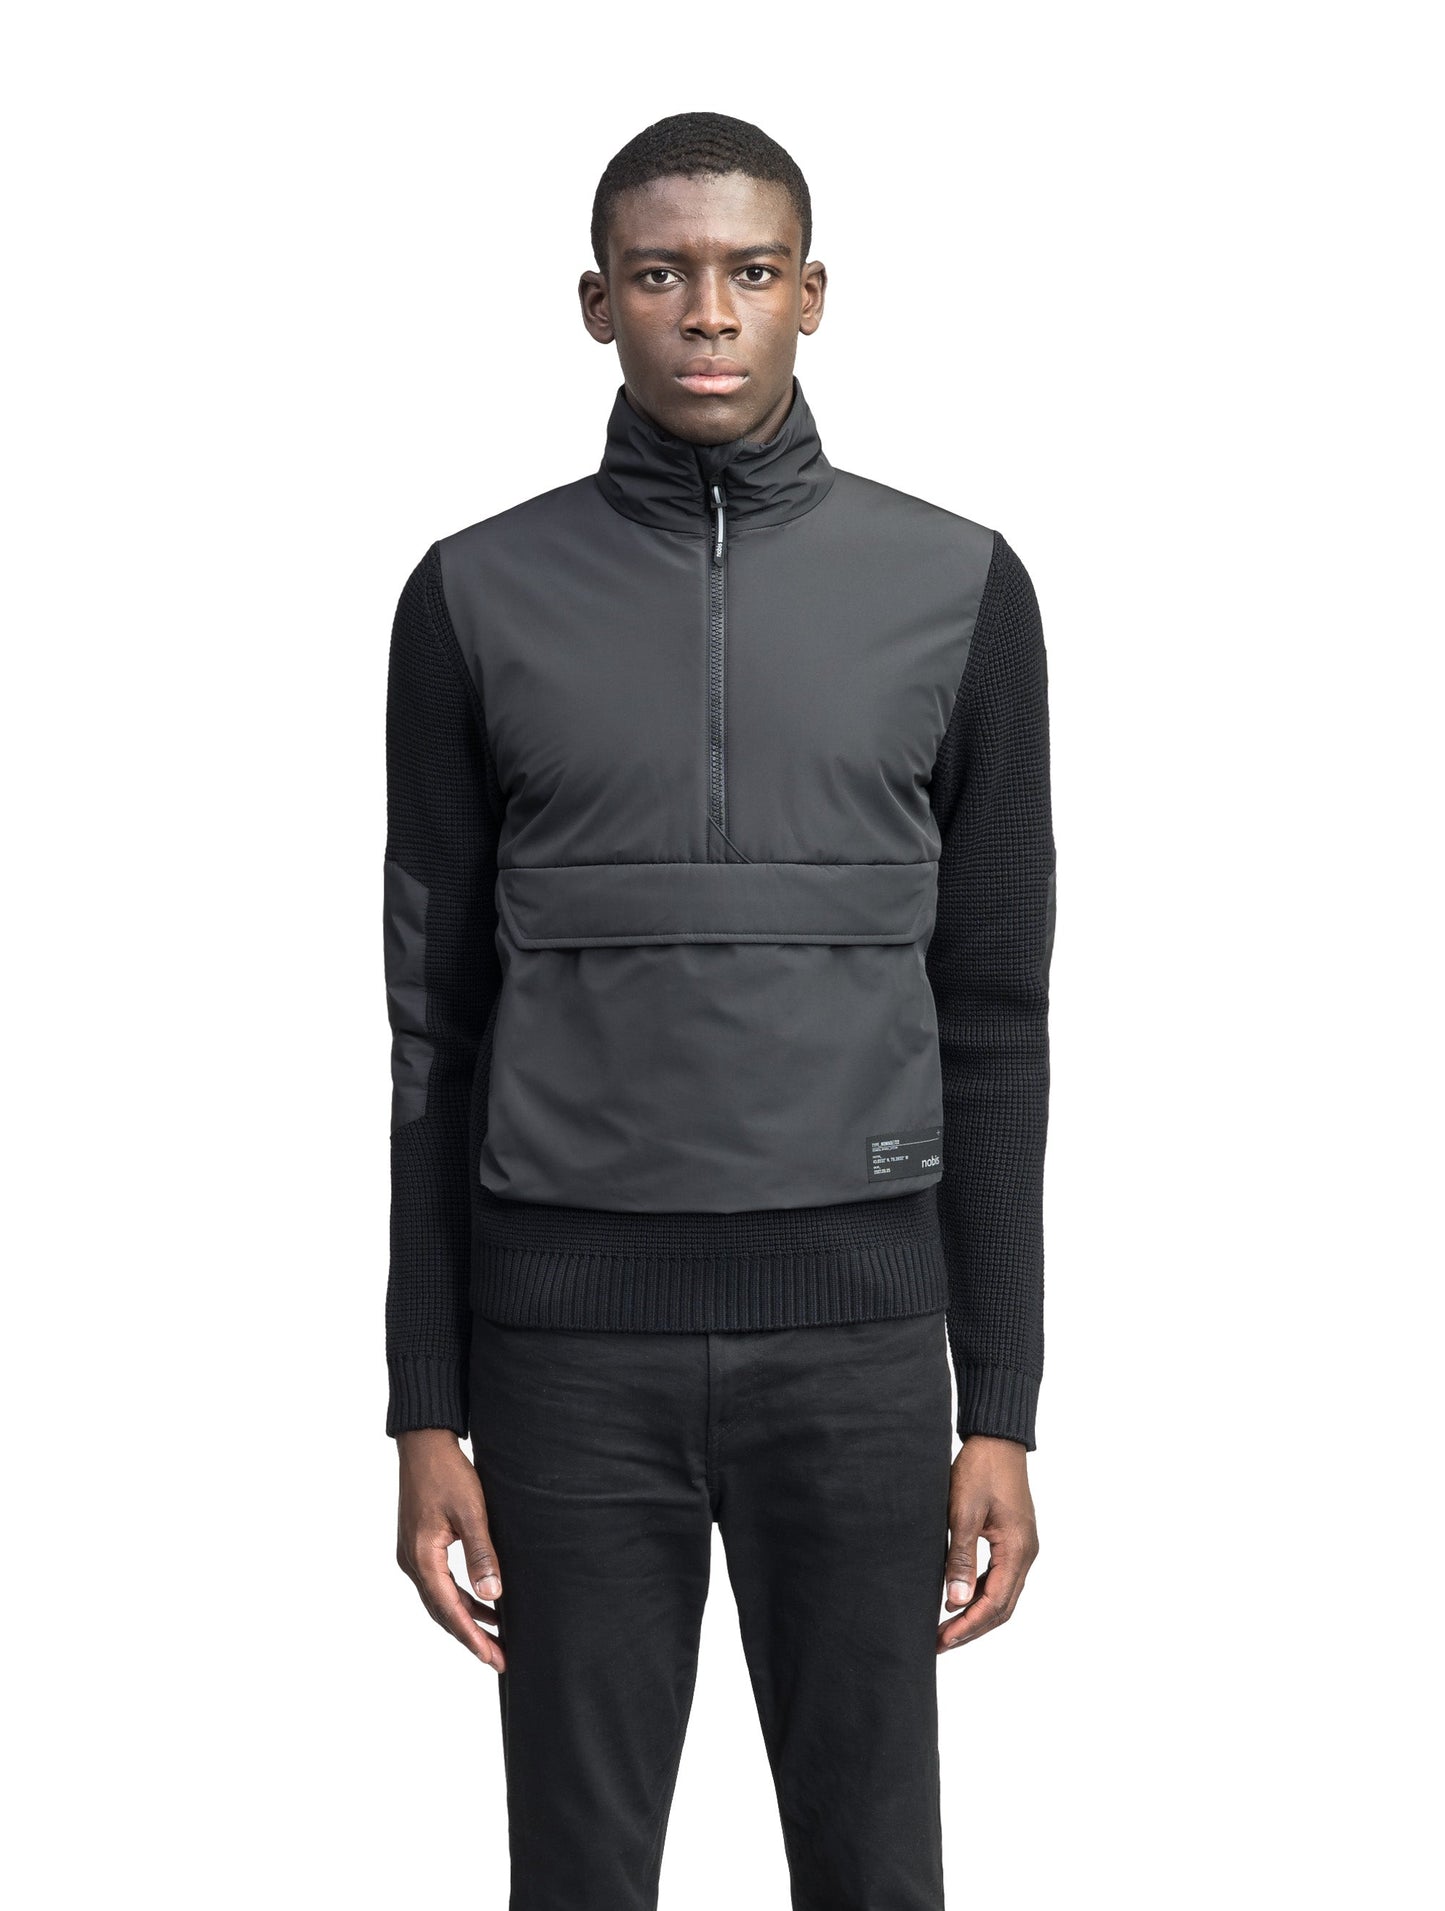 Wai Men's Performance Half Zip Sweater in hip length, 3-Ply Micro Denier and Merino wool knit fabrication, Primaloft Gold Insulation Active+, centre front zipper, flap kangaroo pocket with magnetic closure, and hidden side-entry zipper pockets at waist, in Black